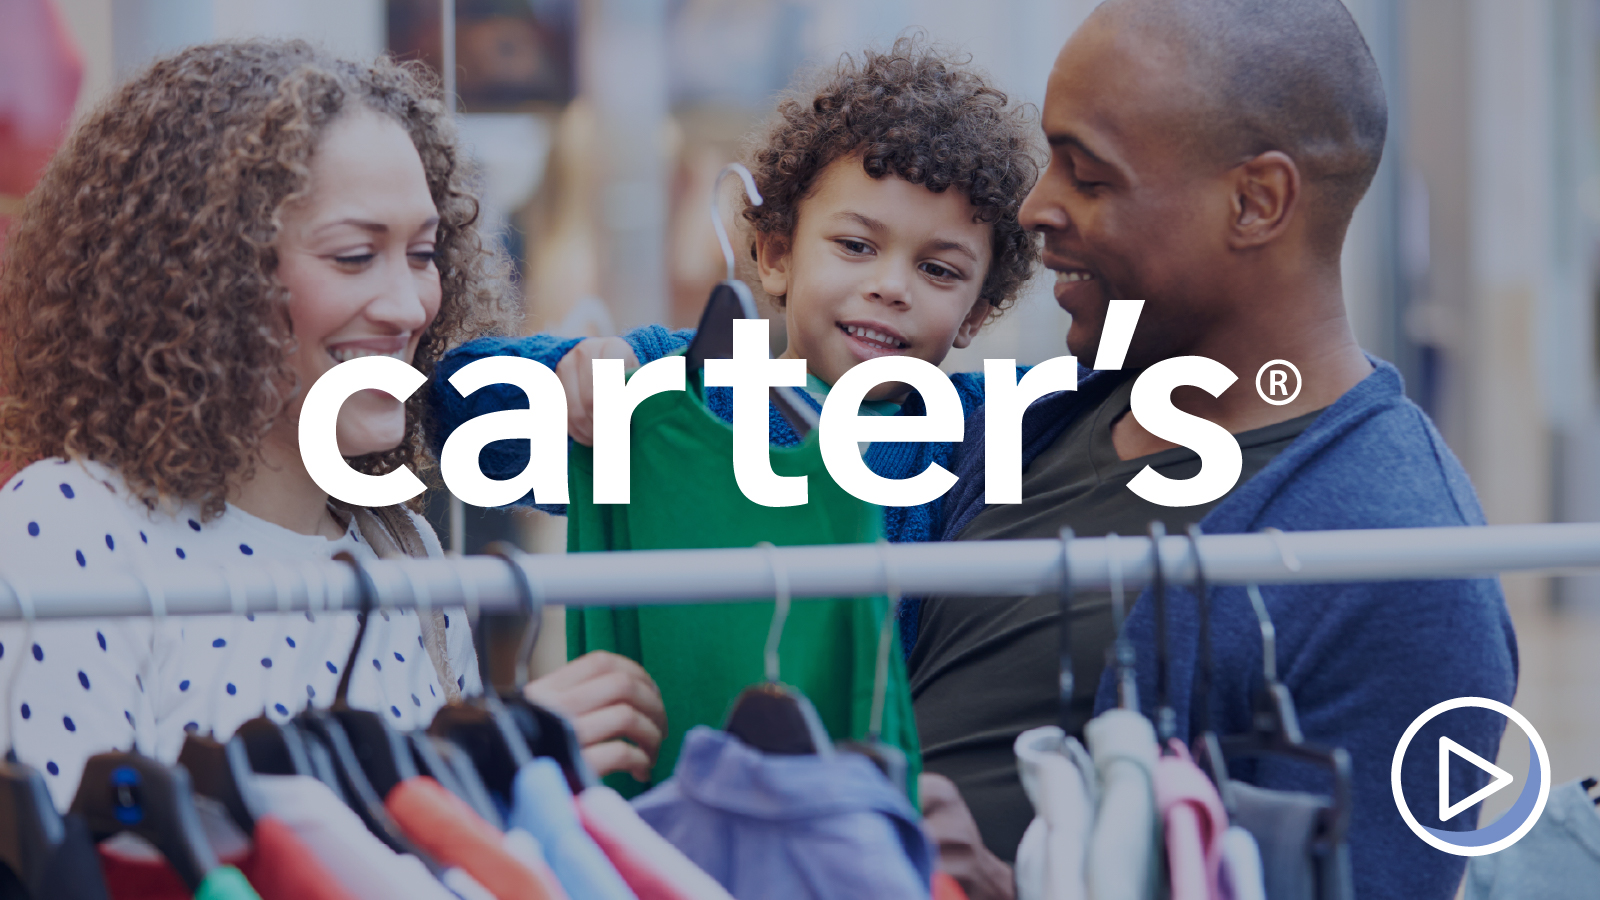 Graphic: family shopping at retail with Carter's logo overlay